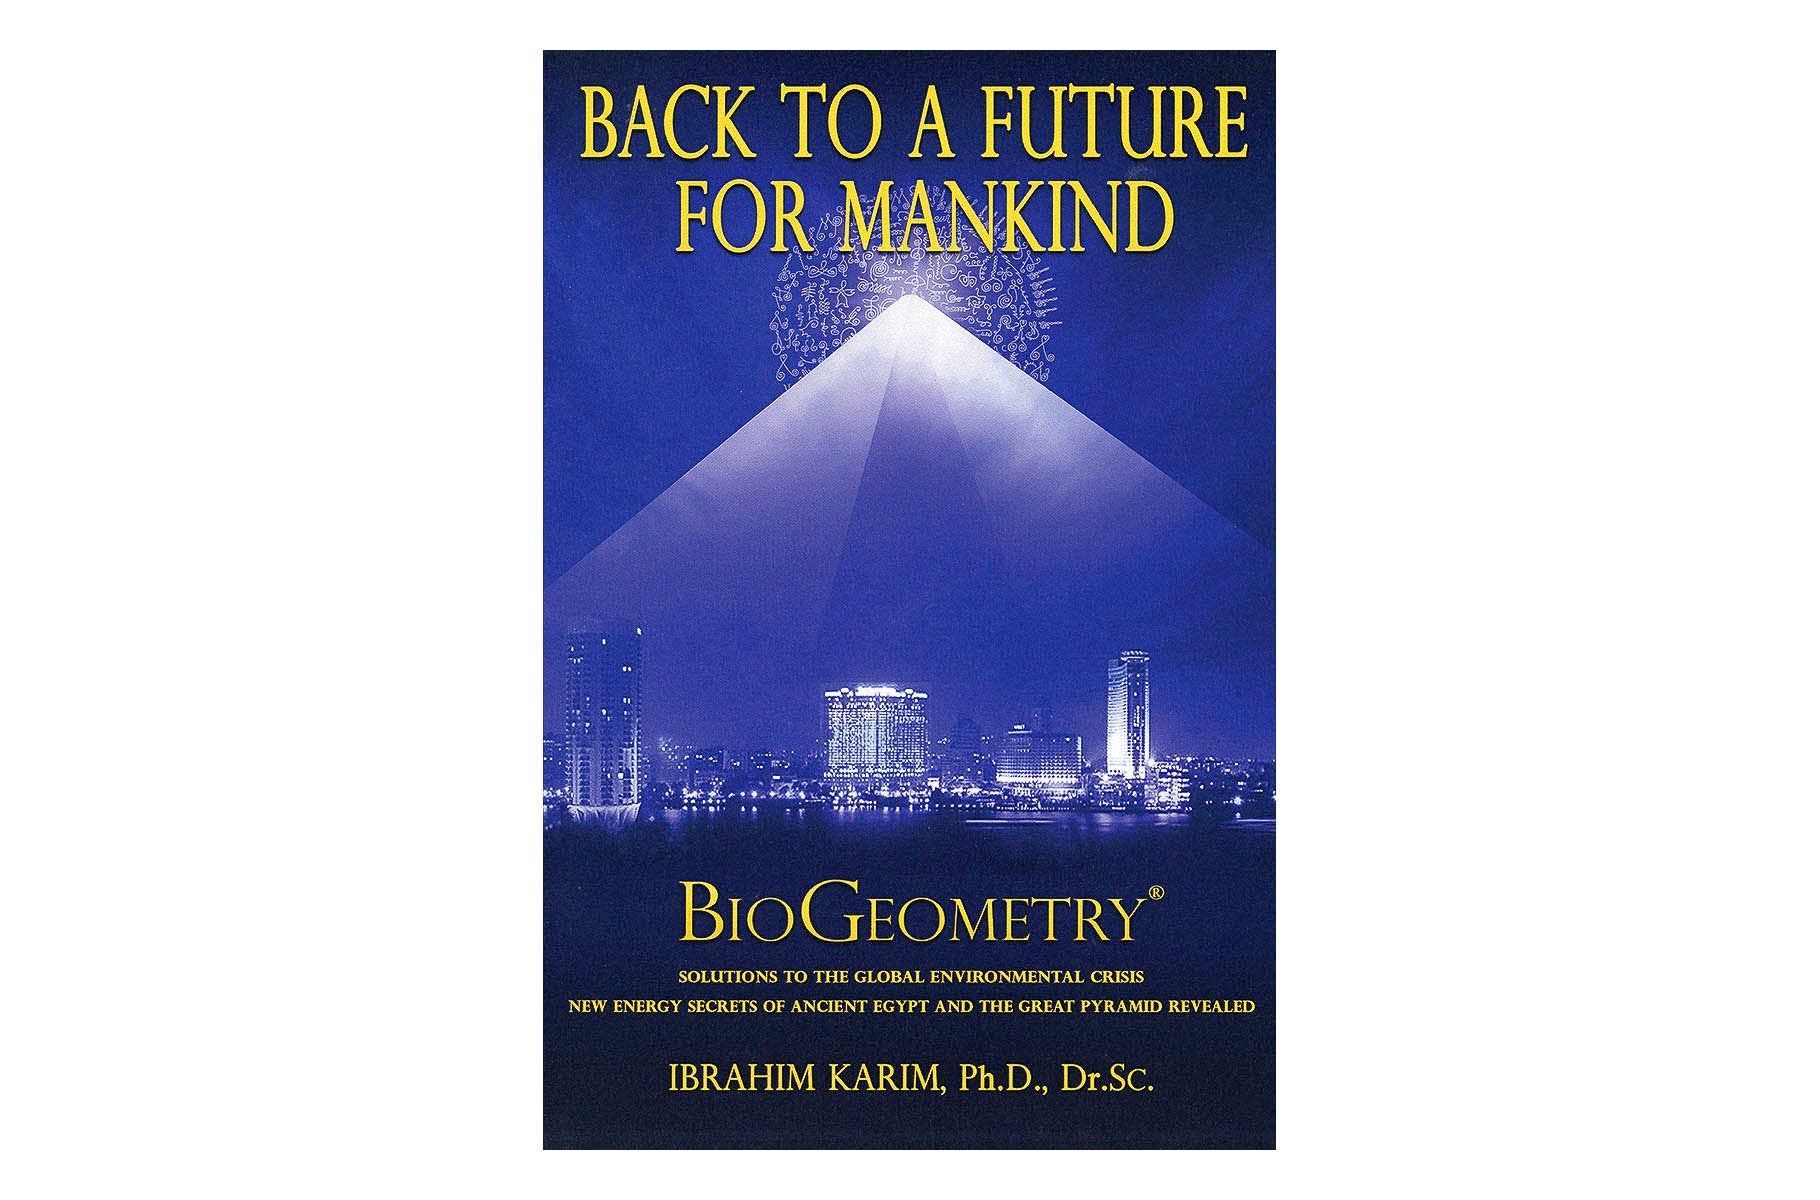 BioGeometry - Back to a Future for Mankind Book -  Back to a Future for Mankind Book - BG Shop Online, An Independent BioGeometry Retailer